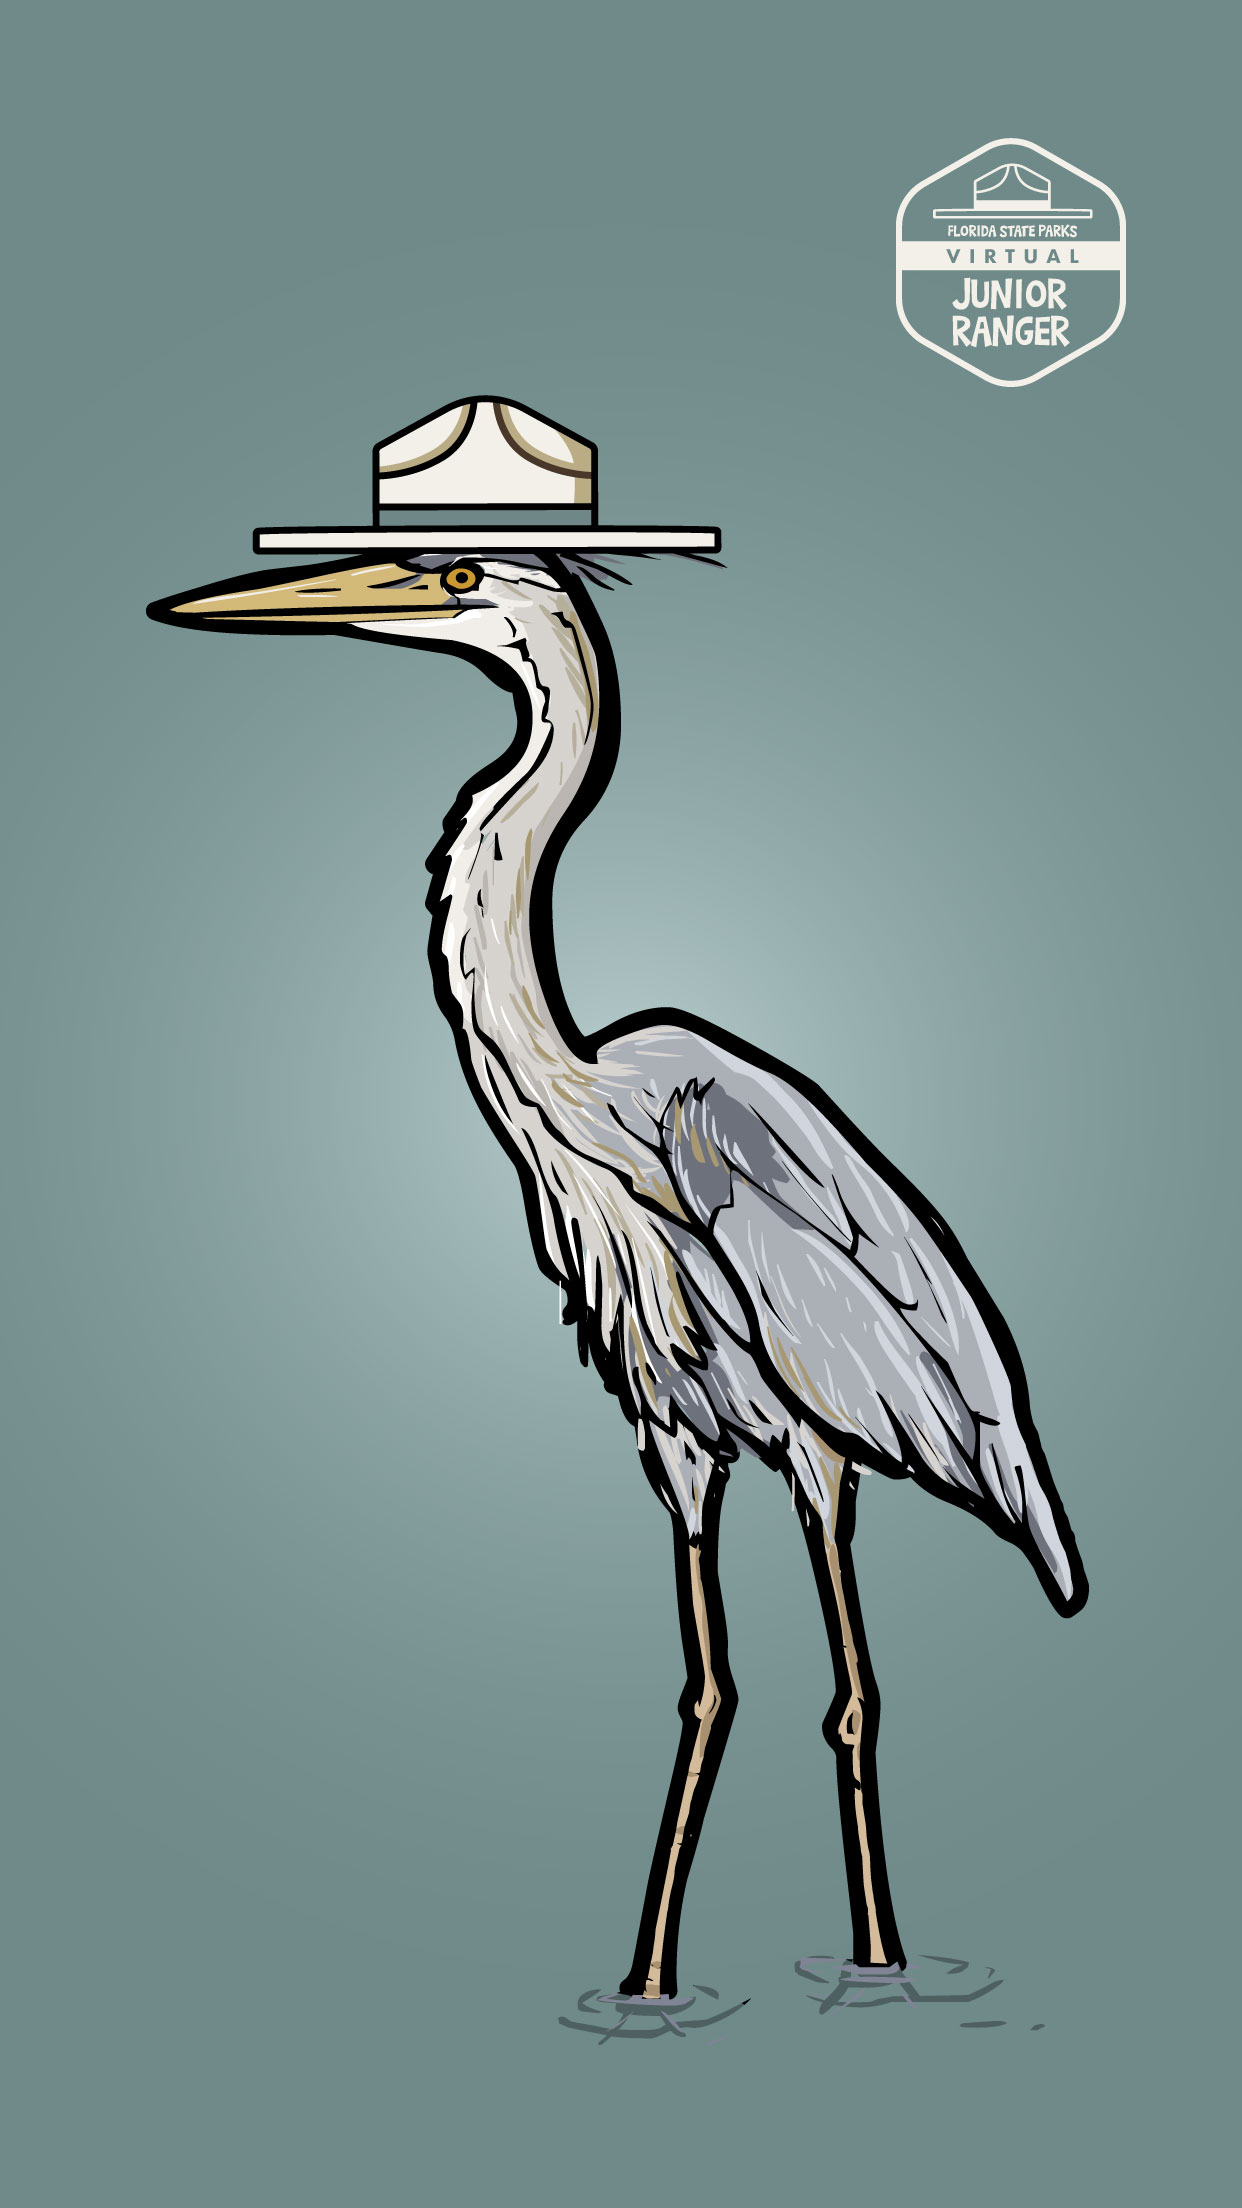 Image of a Great Blue Heron wearing a Ranger hat, sized for phone